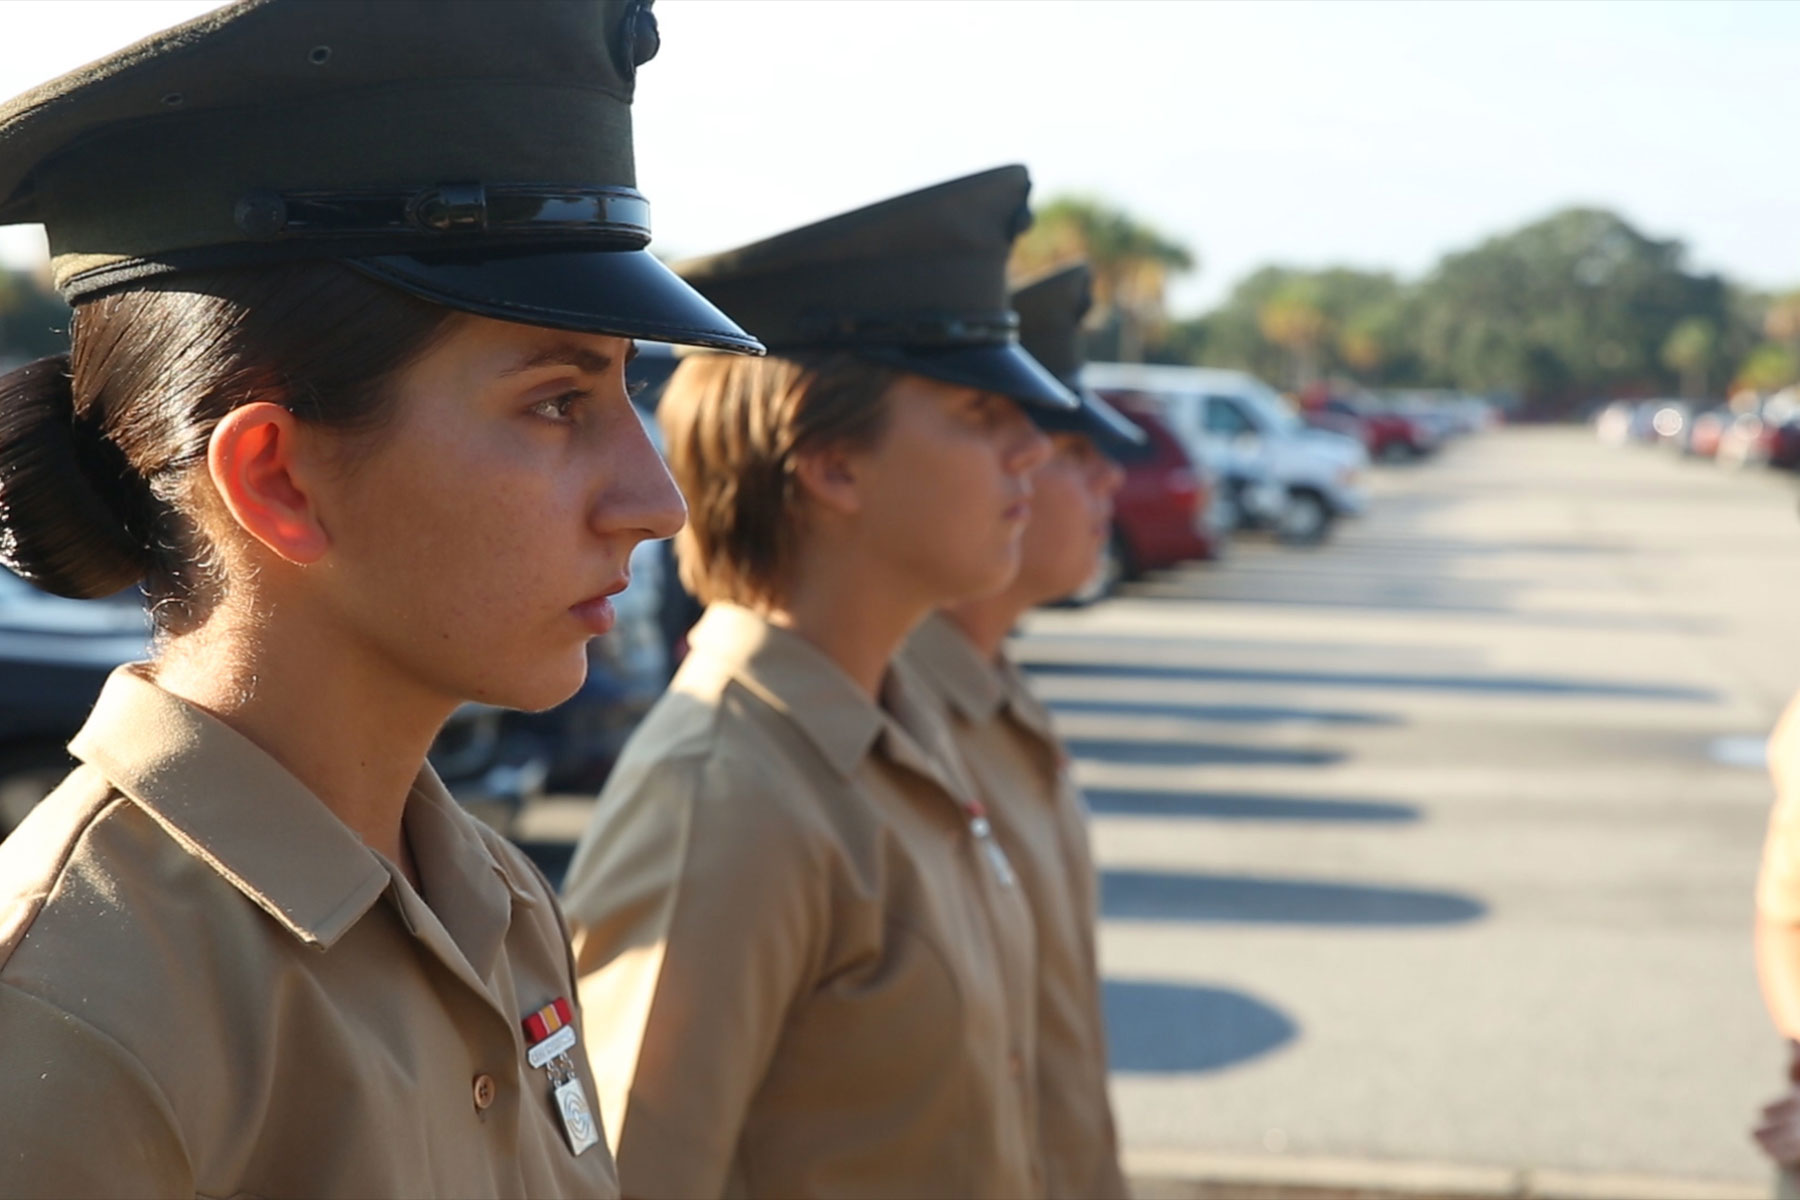 Pfc. Amanda H. Issa prepares for a graduation ceremony Sept. 30, 2016, on Parris Island, S.C. Issa, 21, from Madison Heights, Mich., grew up in Mosul, Iraq, and moved to the U.S. in May 2011. (Photo: U.S. Marine Corps/Carlin Warren)